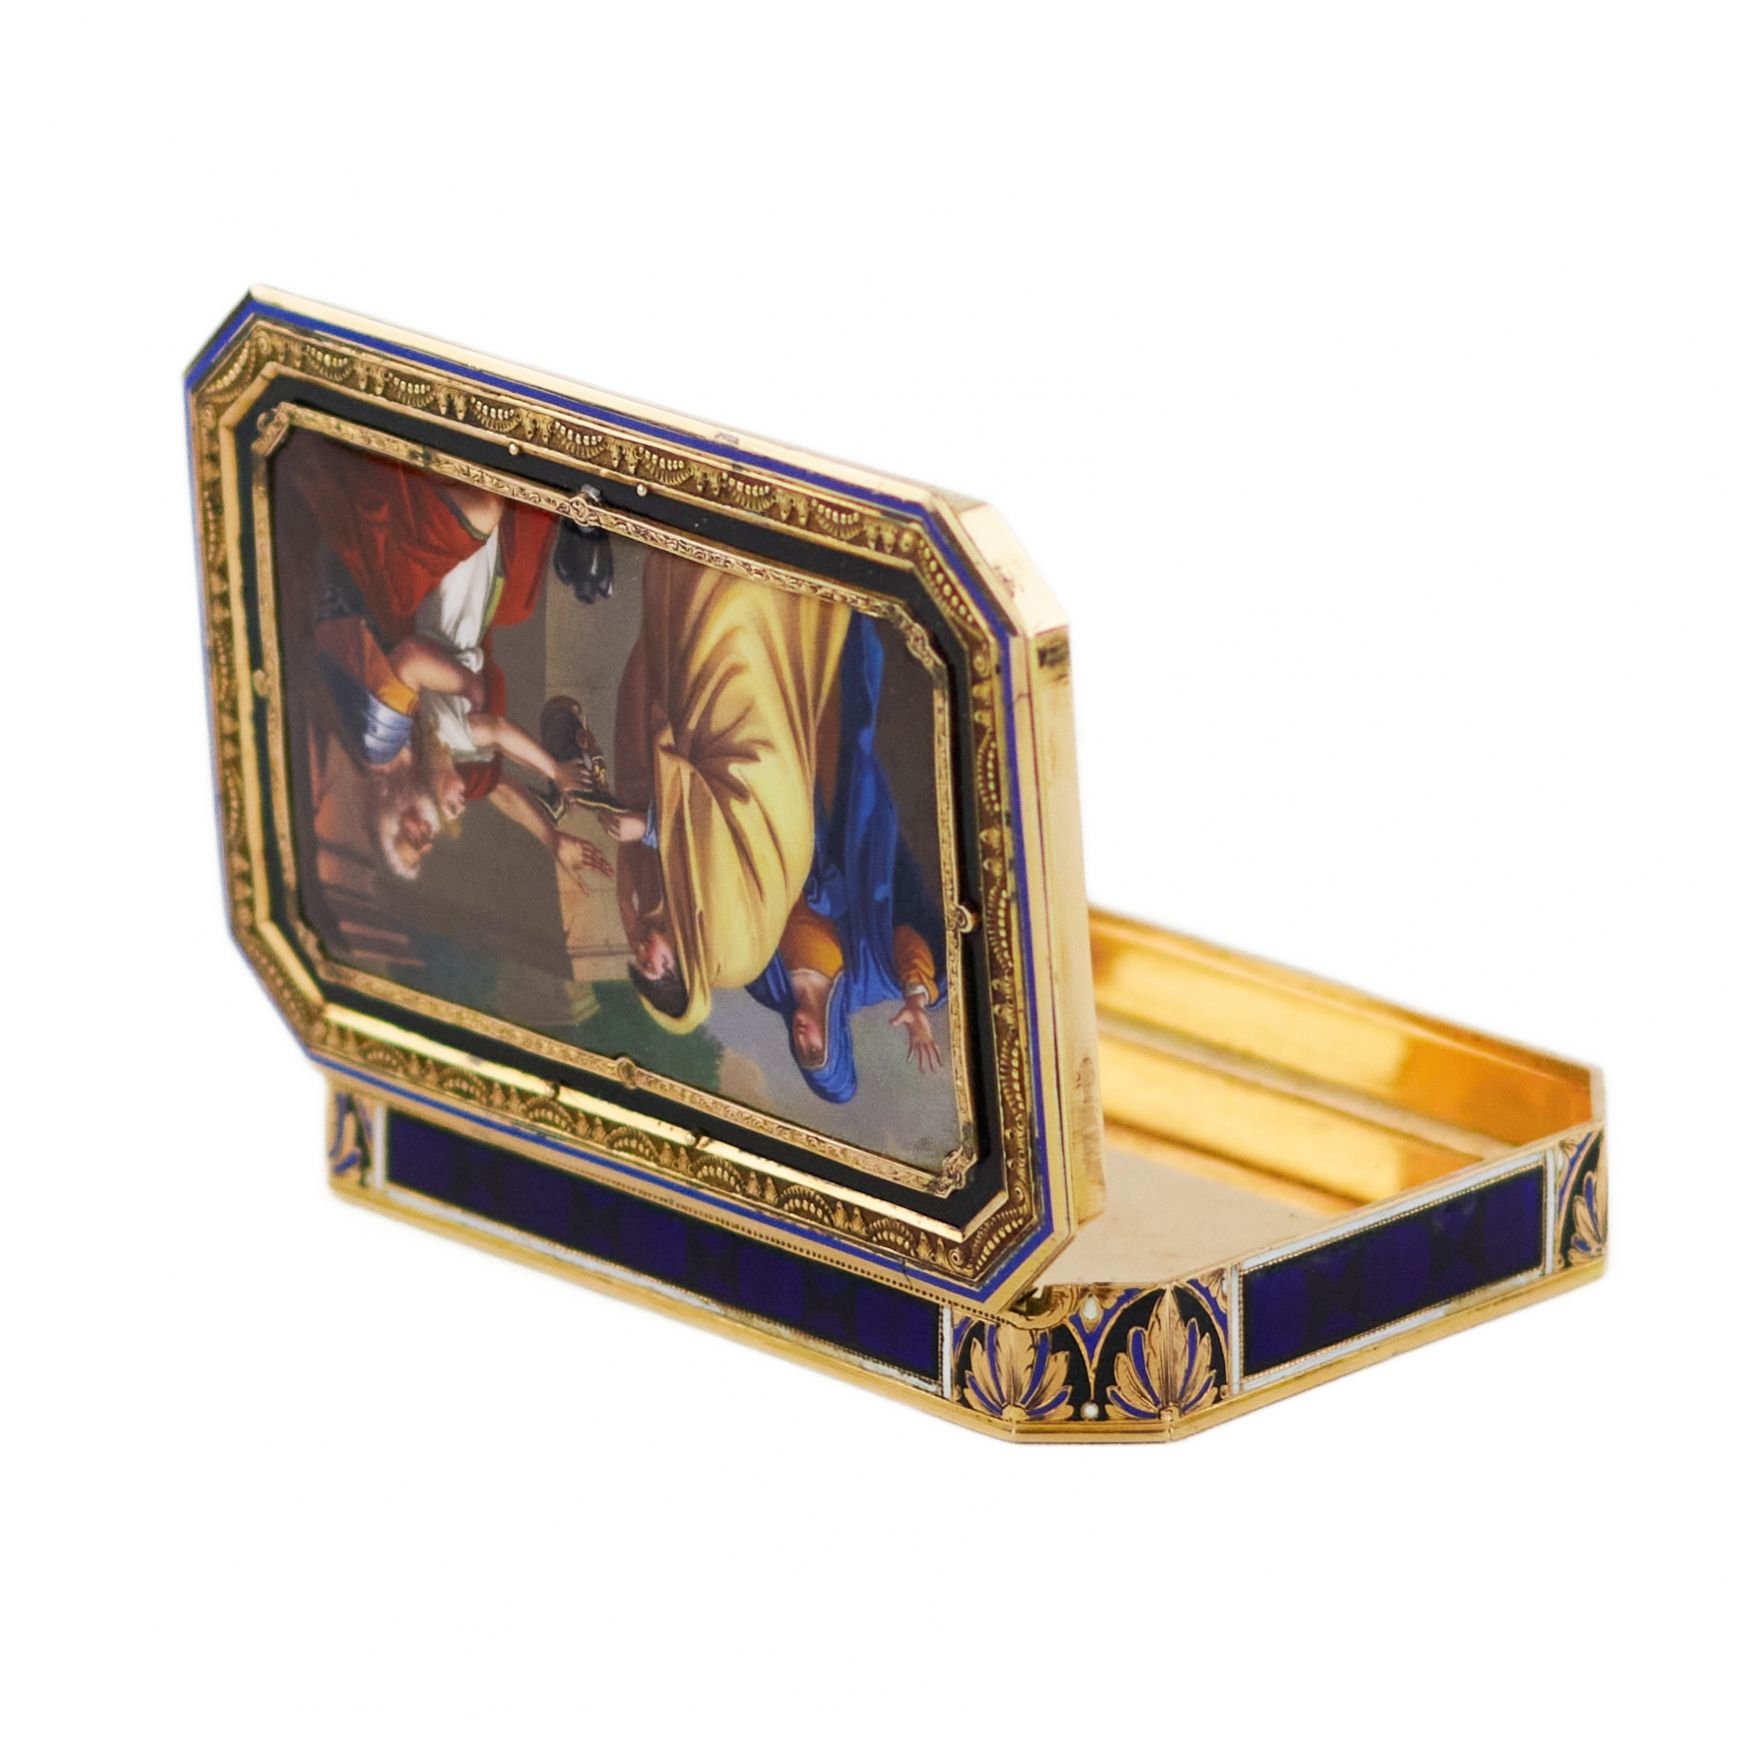 Gold snuff box with enamel. Jean George Remond & Compagnie. 1810. - Image 4 of 6